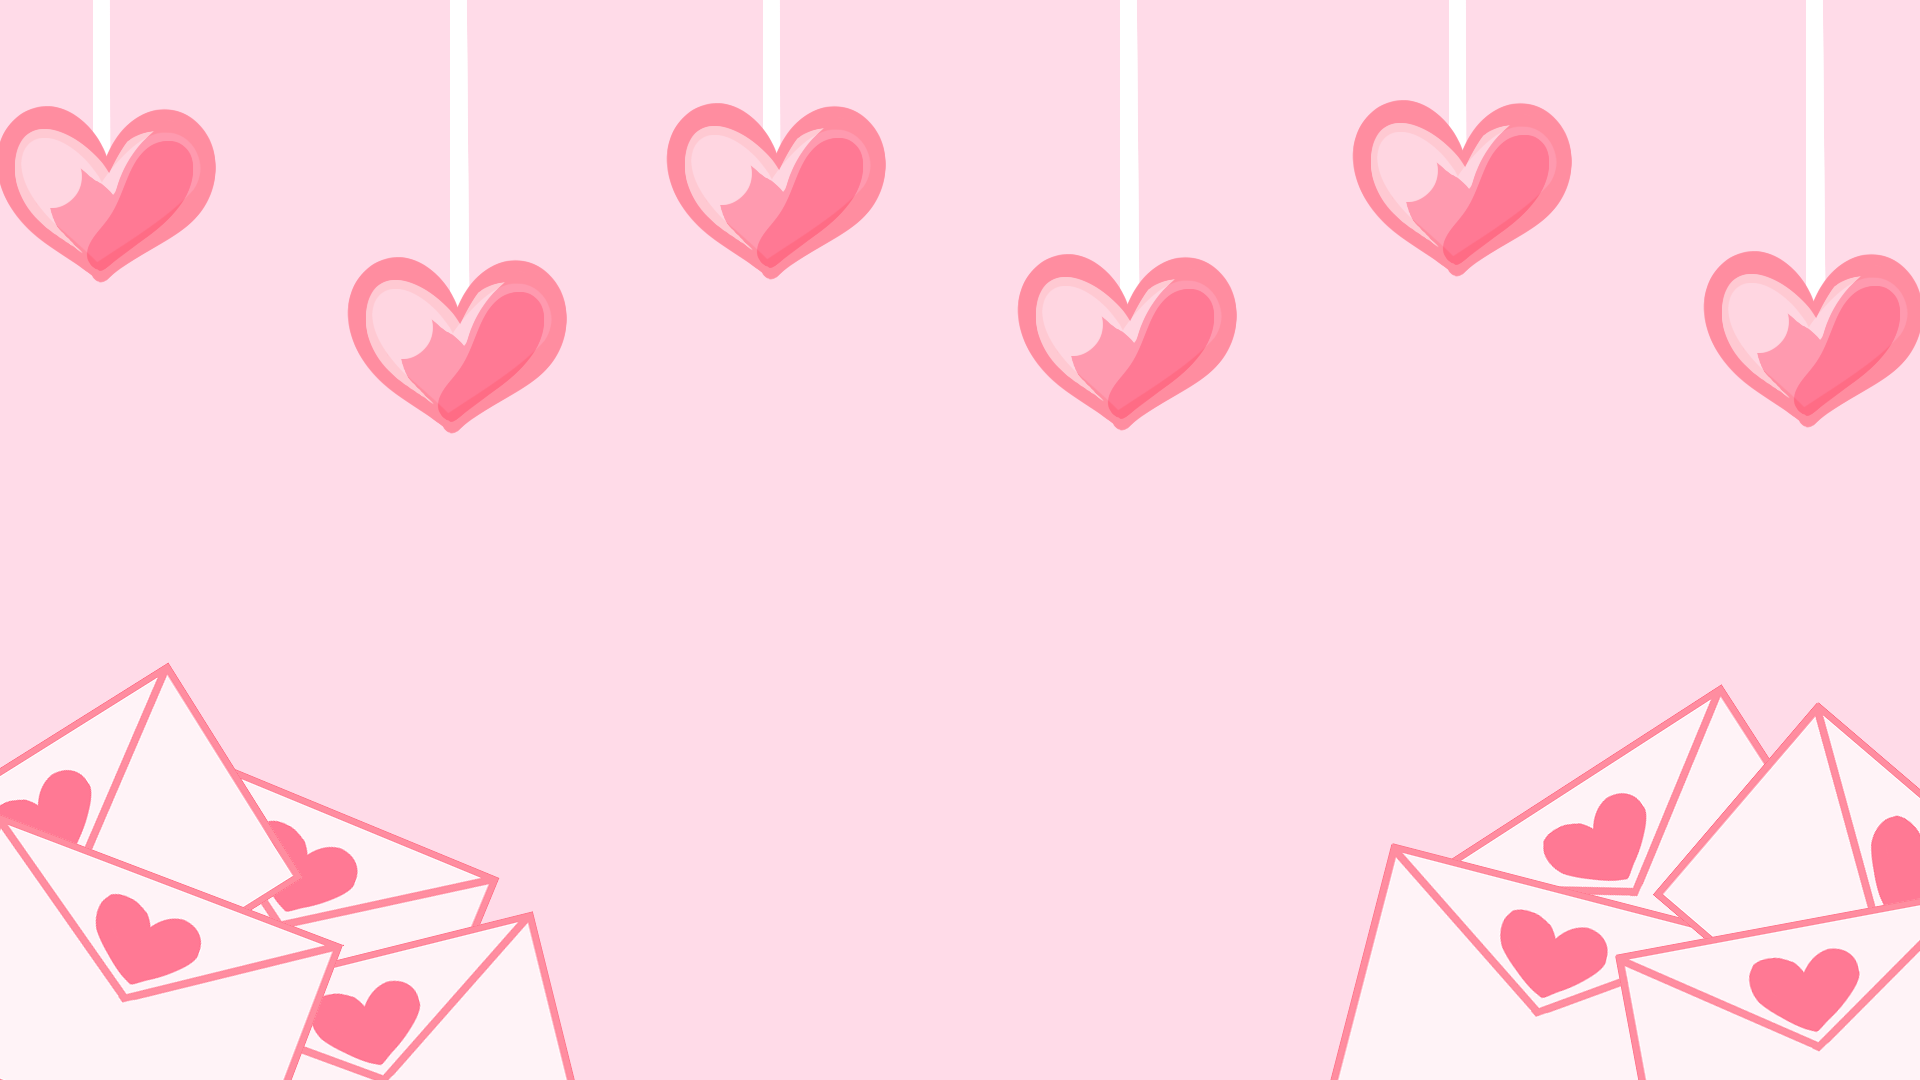 Valentine's Day wallpaper with hearts and envelopes - Lovecore